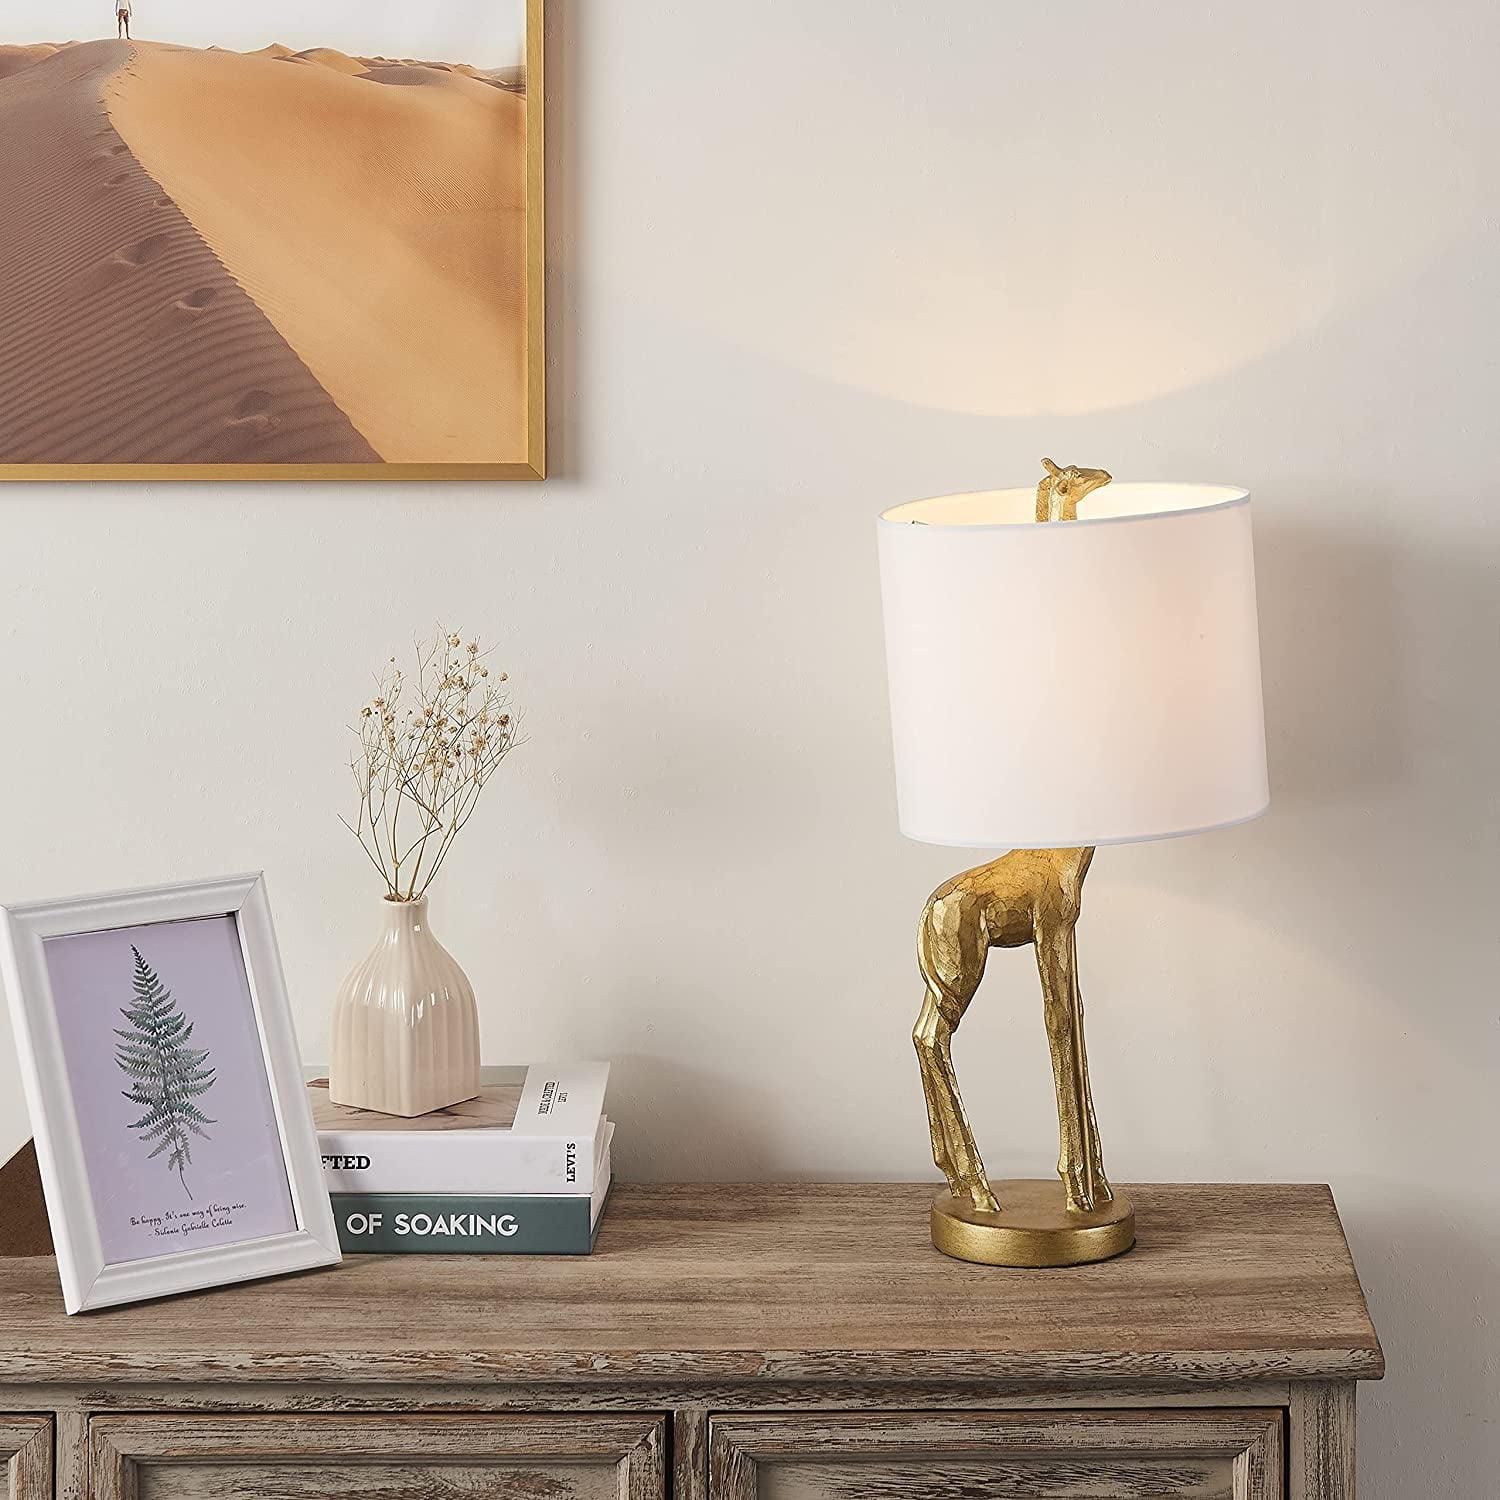 Vanity Art 16.54" Indoor Gold Table Lamp with Fabric Shade | Modern Farmhouse Bedside Lamp Giraffe Table Lamp for Bedroom, Living Room, Office, College Dorm - Dahdoul Online